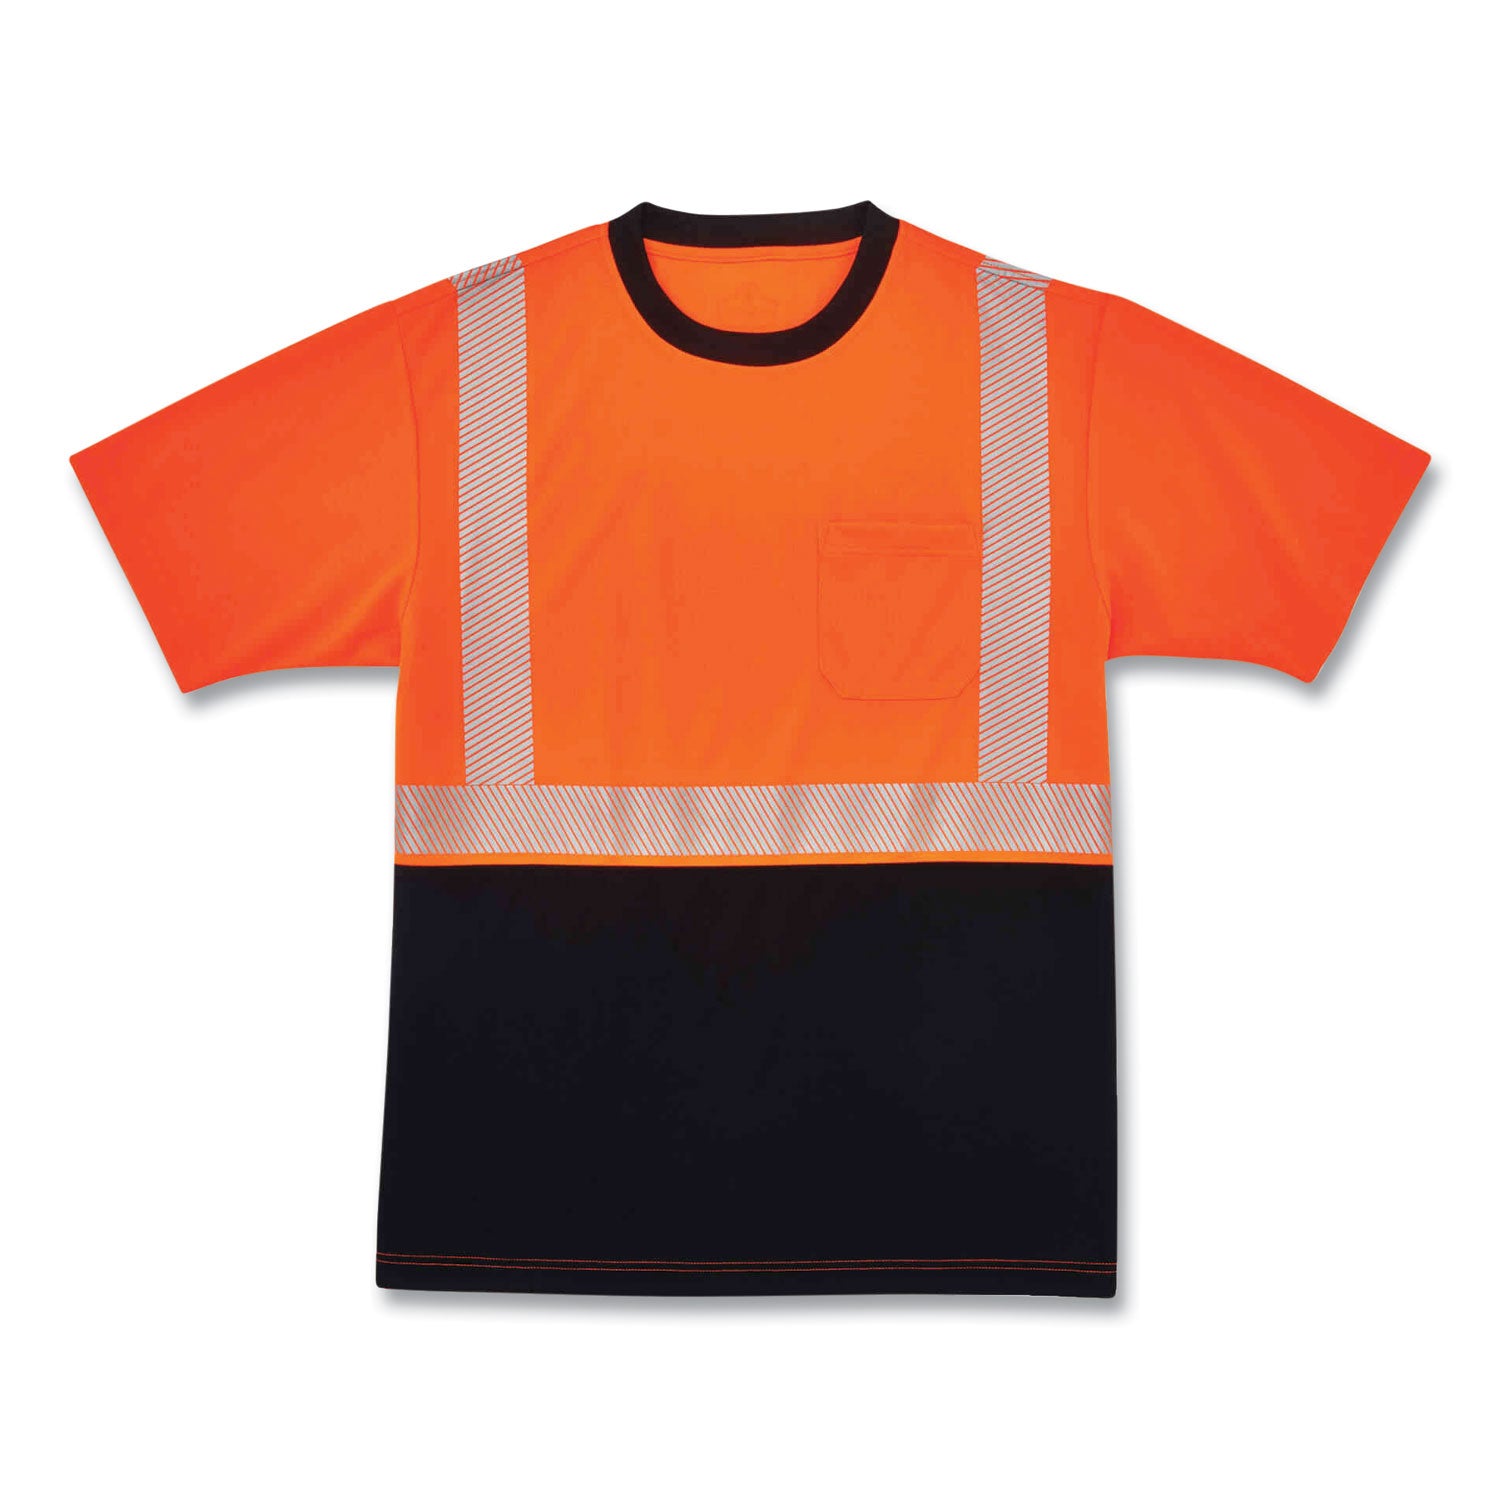 glowear-8280bk-class-2-performance-t-shirt-with-black-bottom-polyester-5x-large-orange-ships-in-1-3-business-days_ego22589 - 1